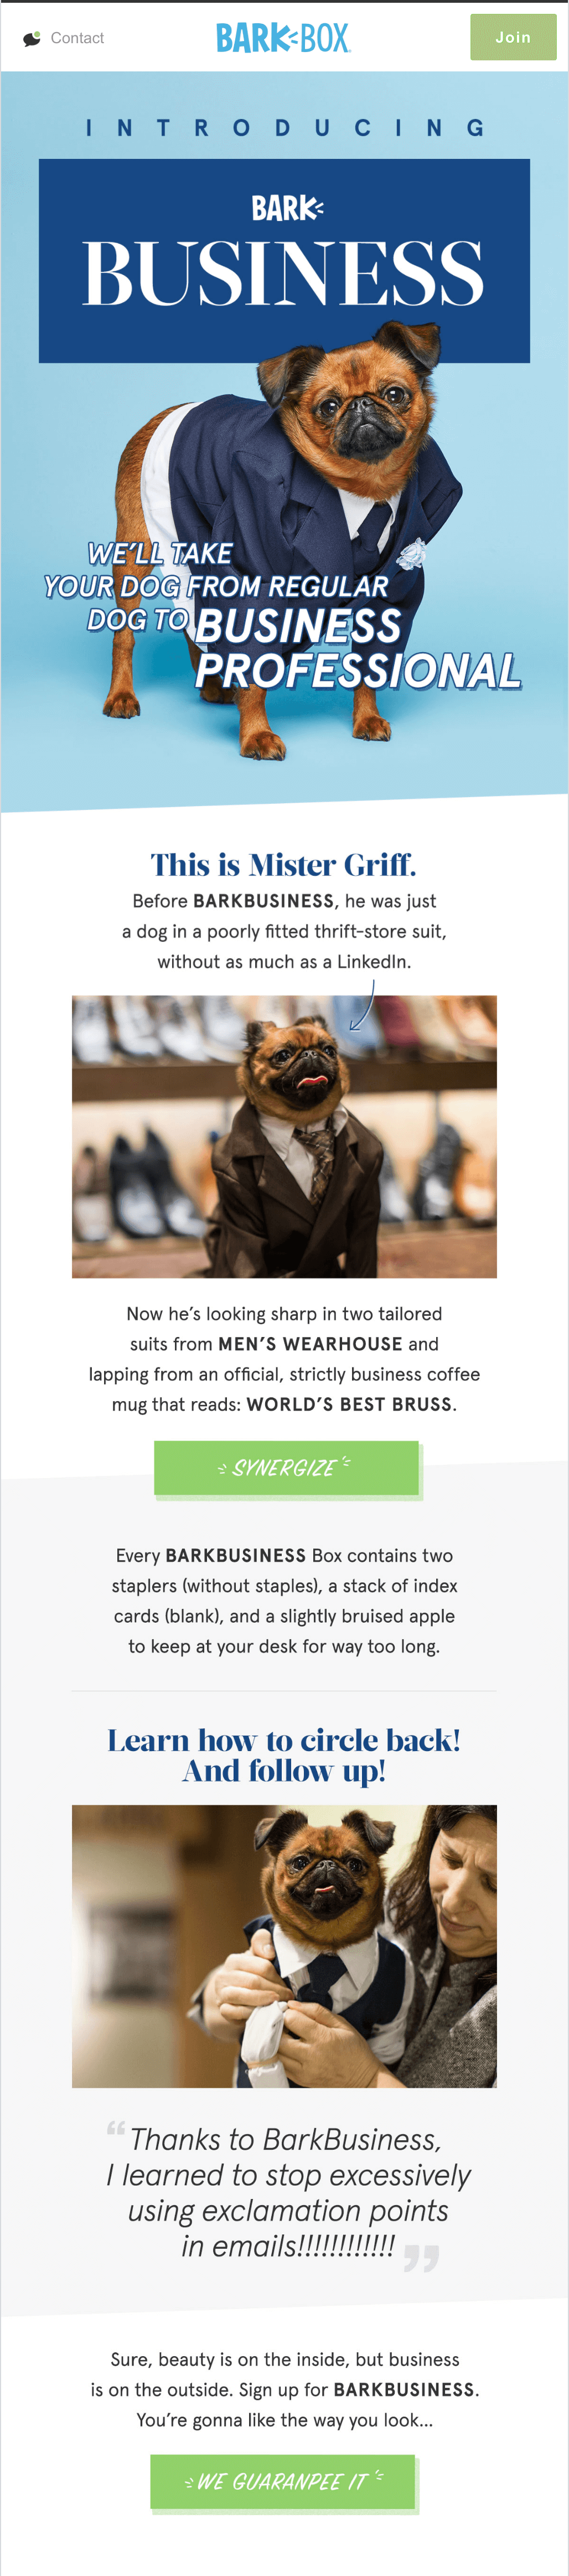 April Fools’ Email Example by BarkBox